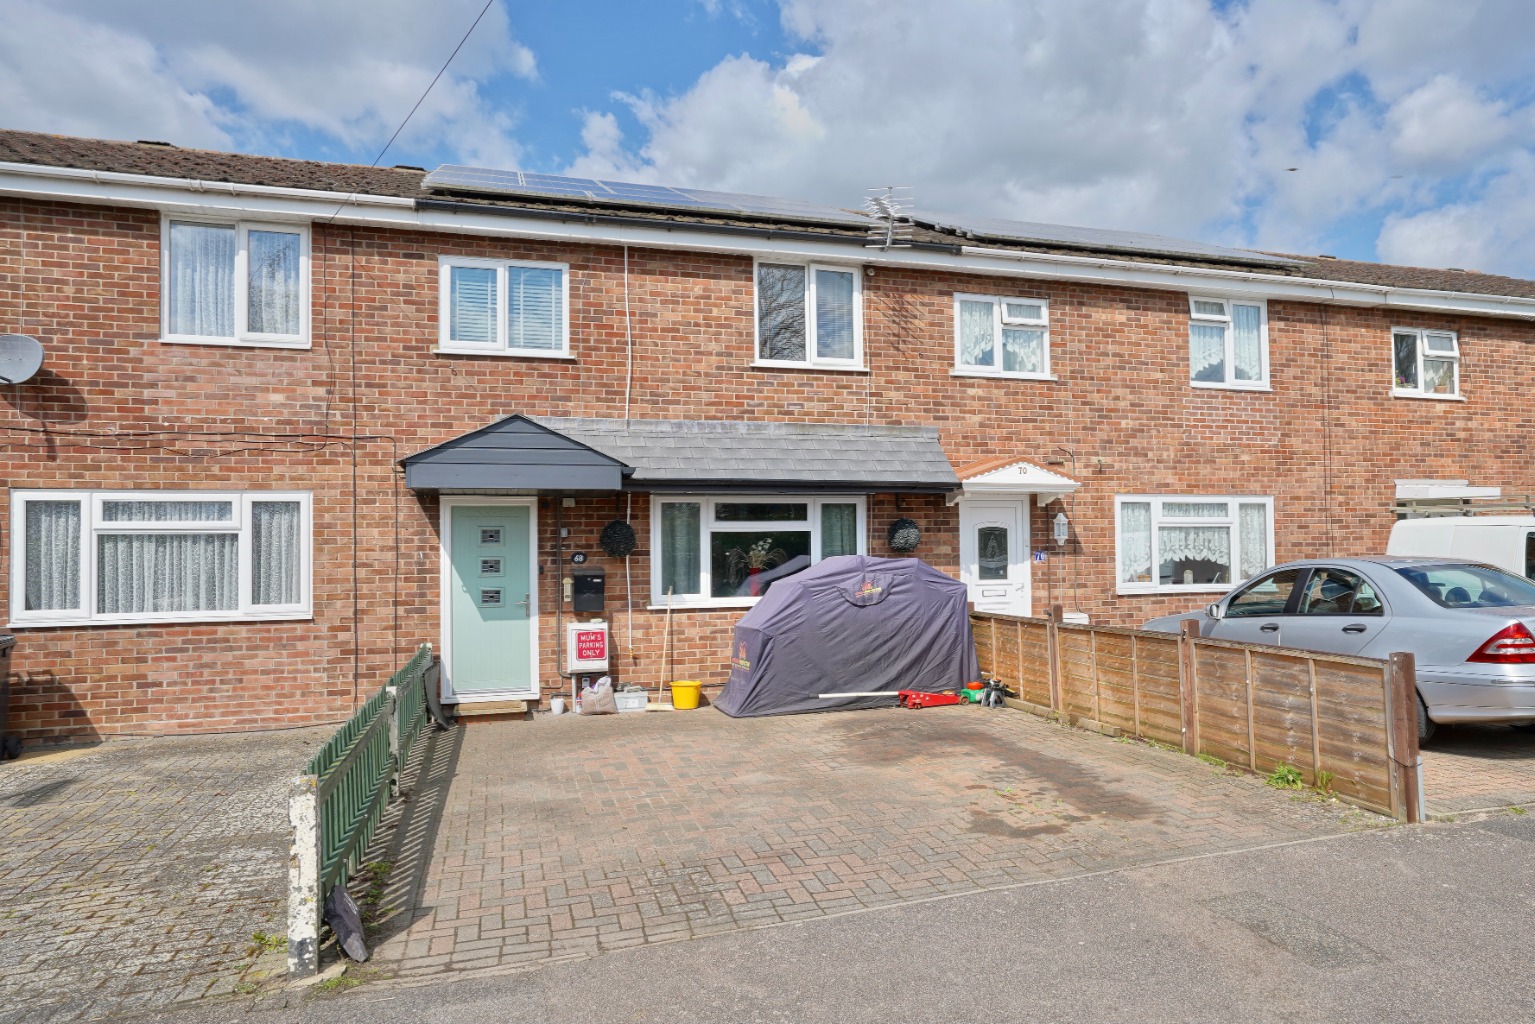 3 bed terraced house for sale in Henbrook, St. Neots - Property Image 1